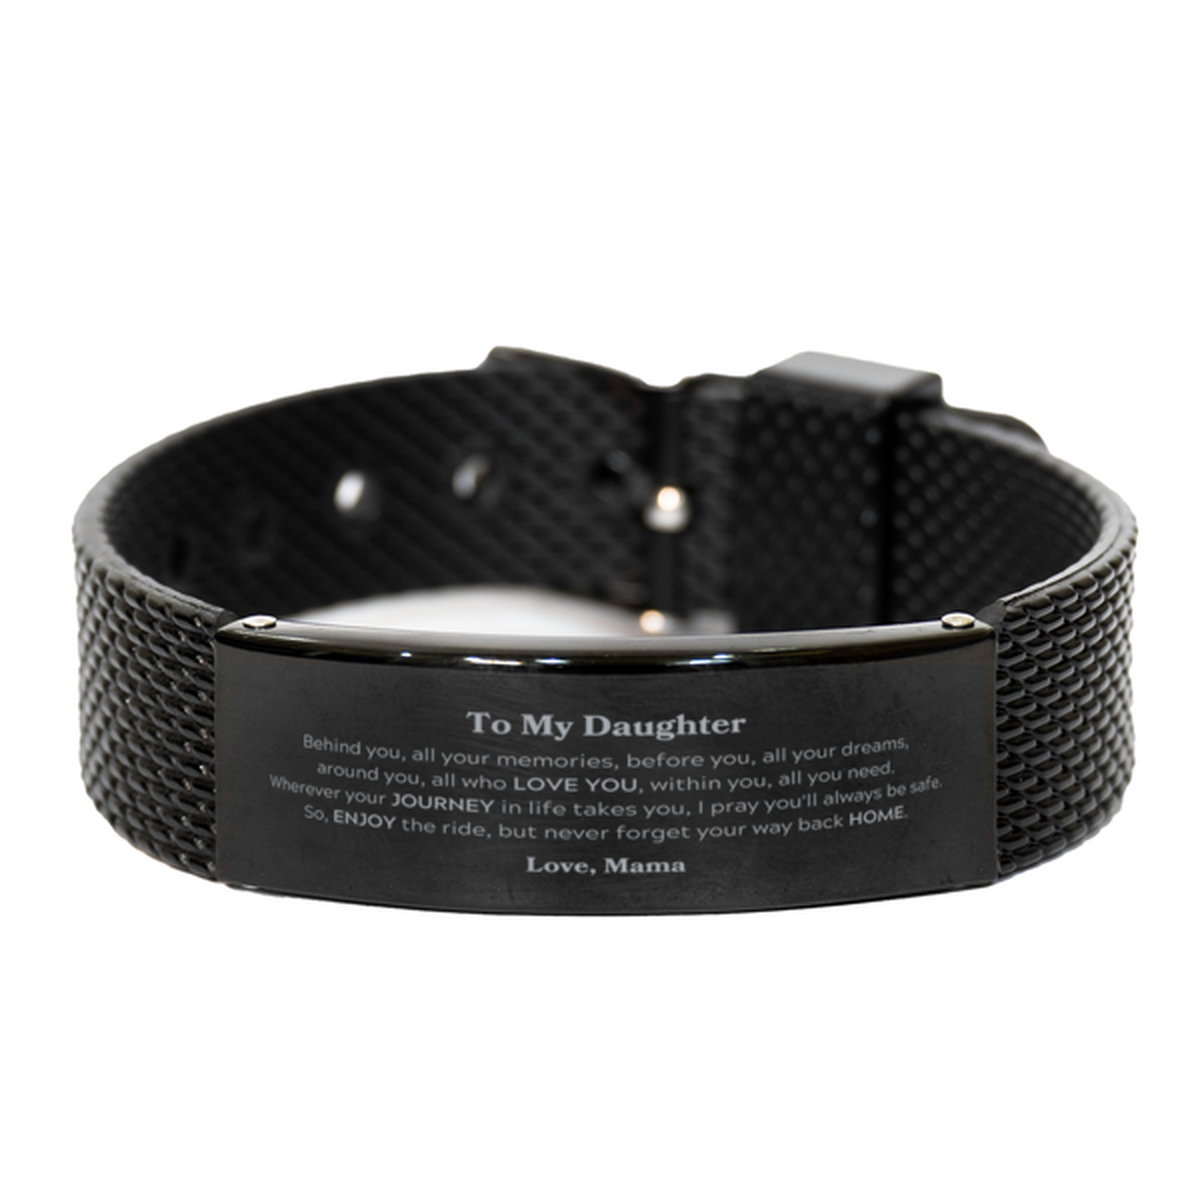 To My Daughter Graduation Gifts from Mama, Daughter Black Shark Mesh Bracelet Christmas Birthday Gifts for Daughter Behind you, all your memories, before you, all your dreams. Love, Mama